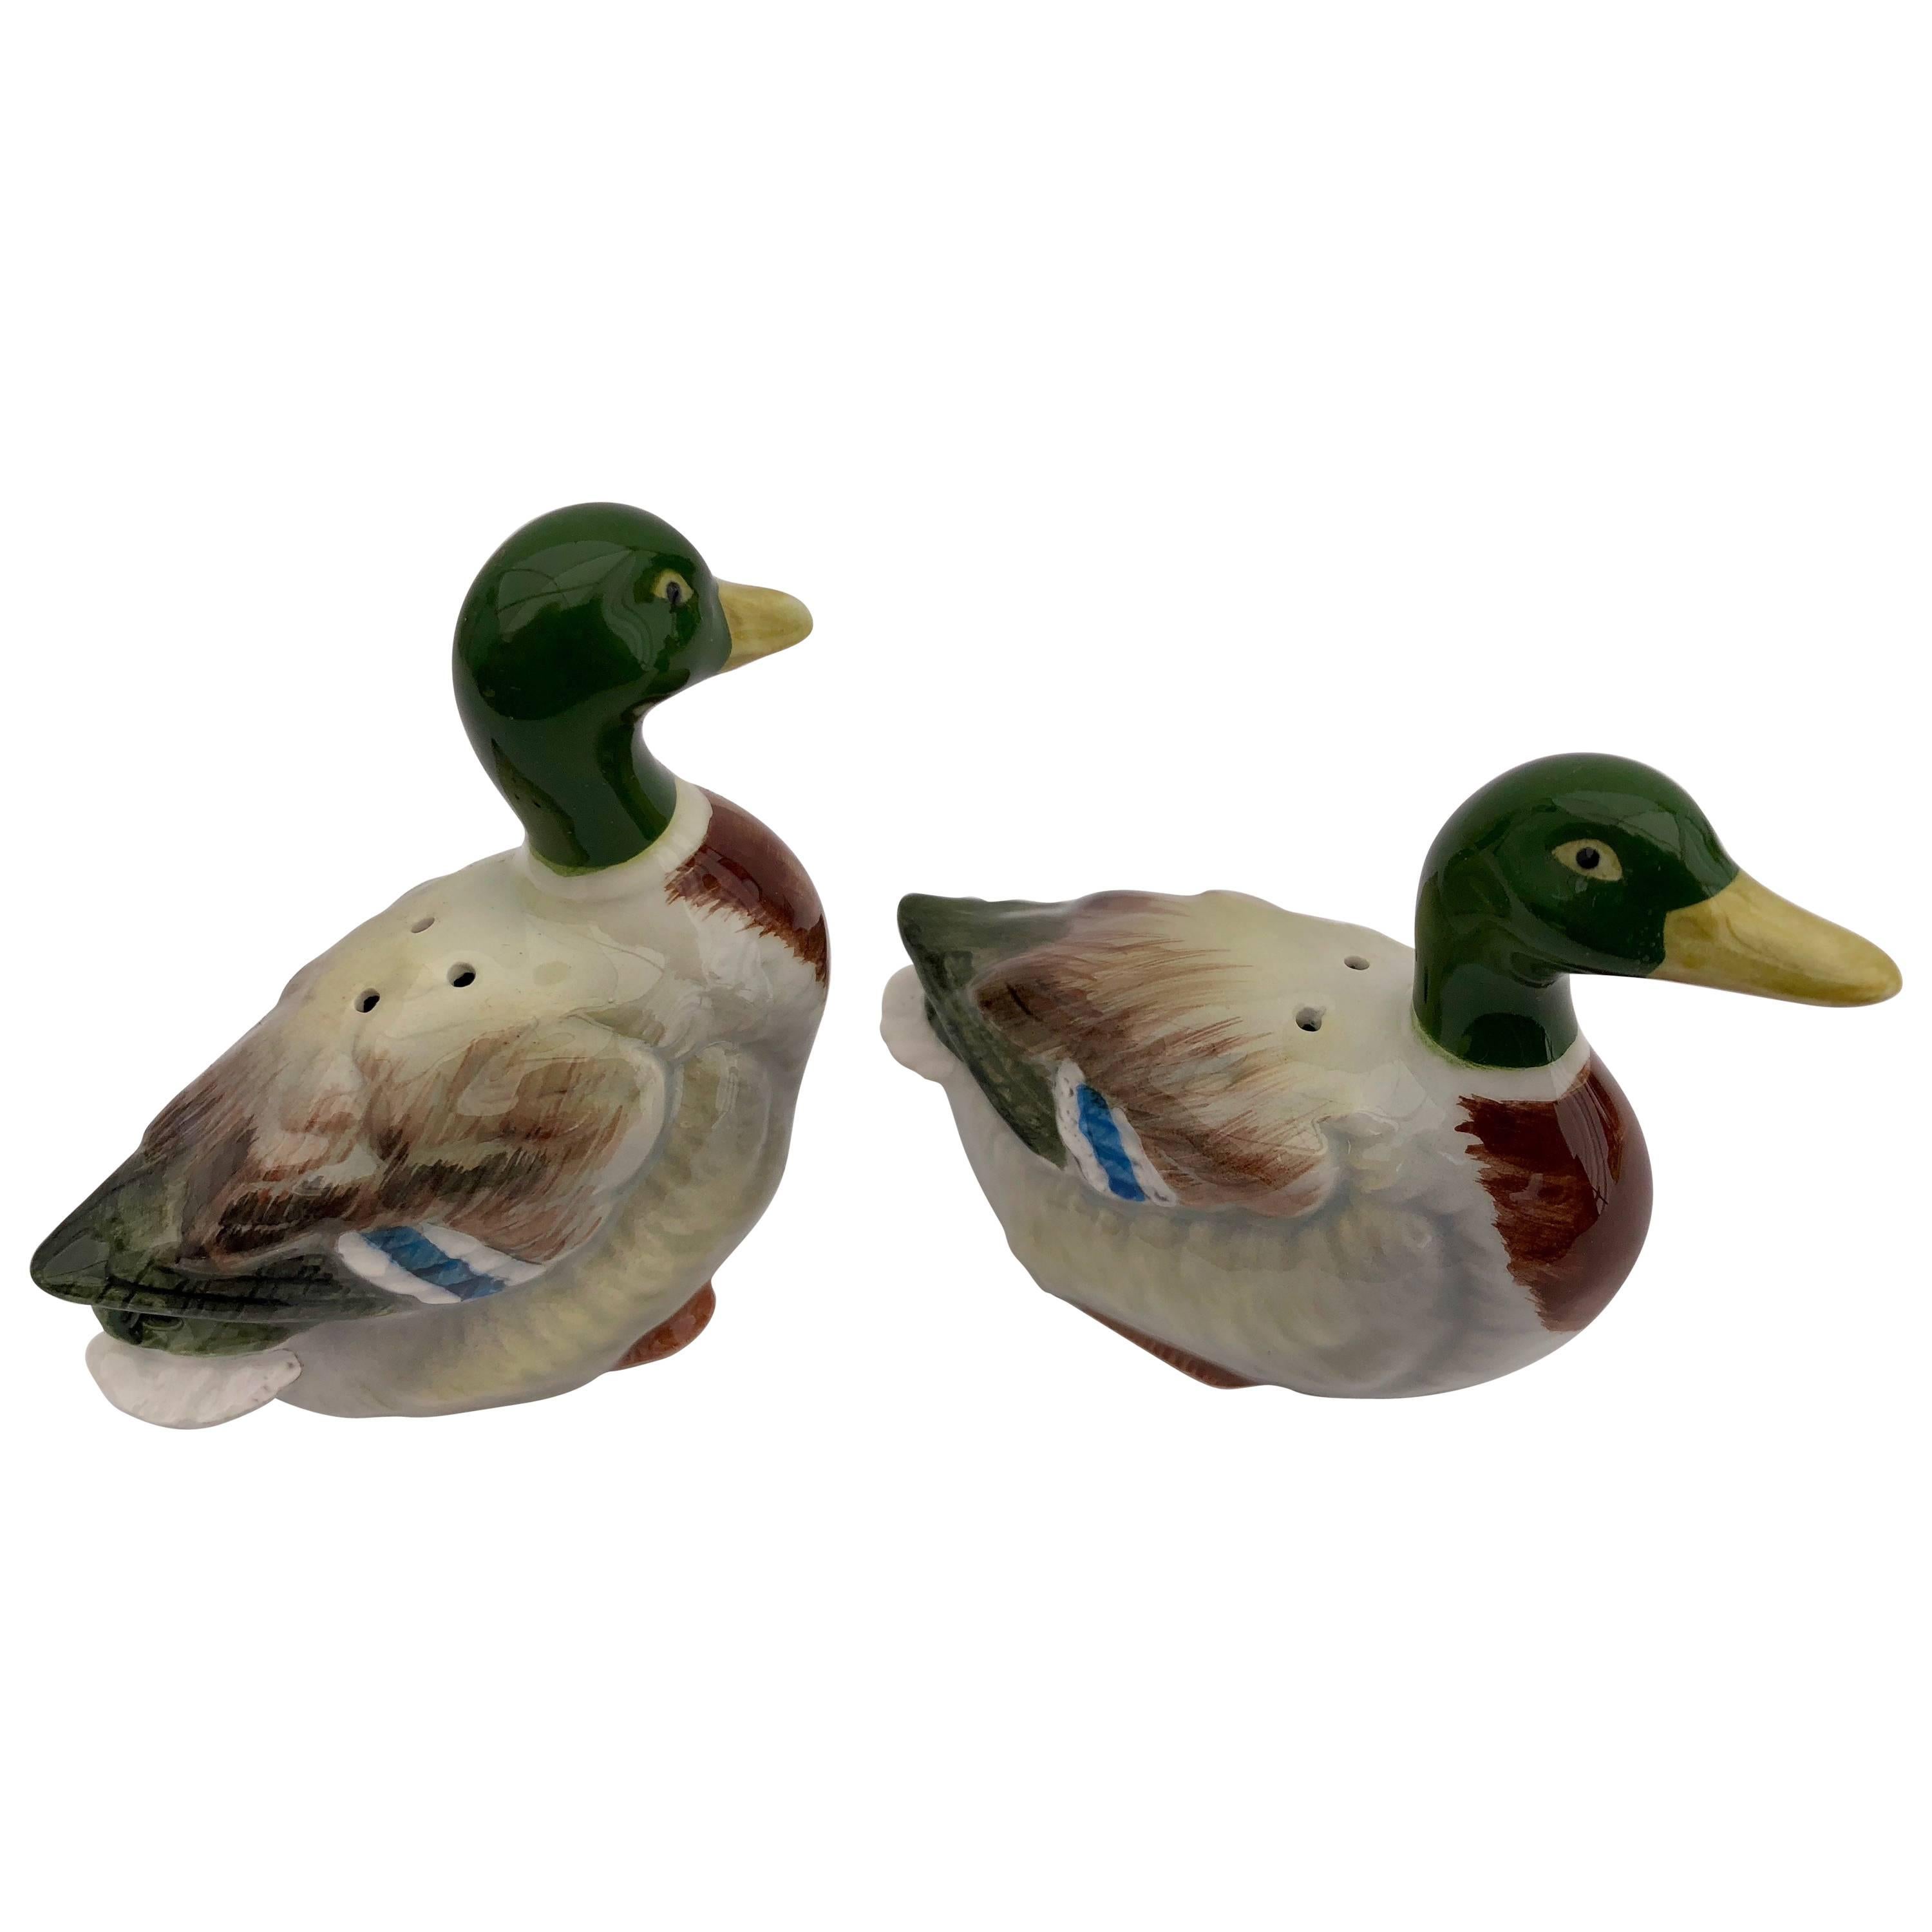 Mallard Duck Ceramic Salt and Pepper Shakers Handcrafted by Otagiri, Japan, Box For Sale